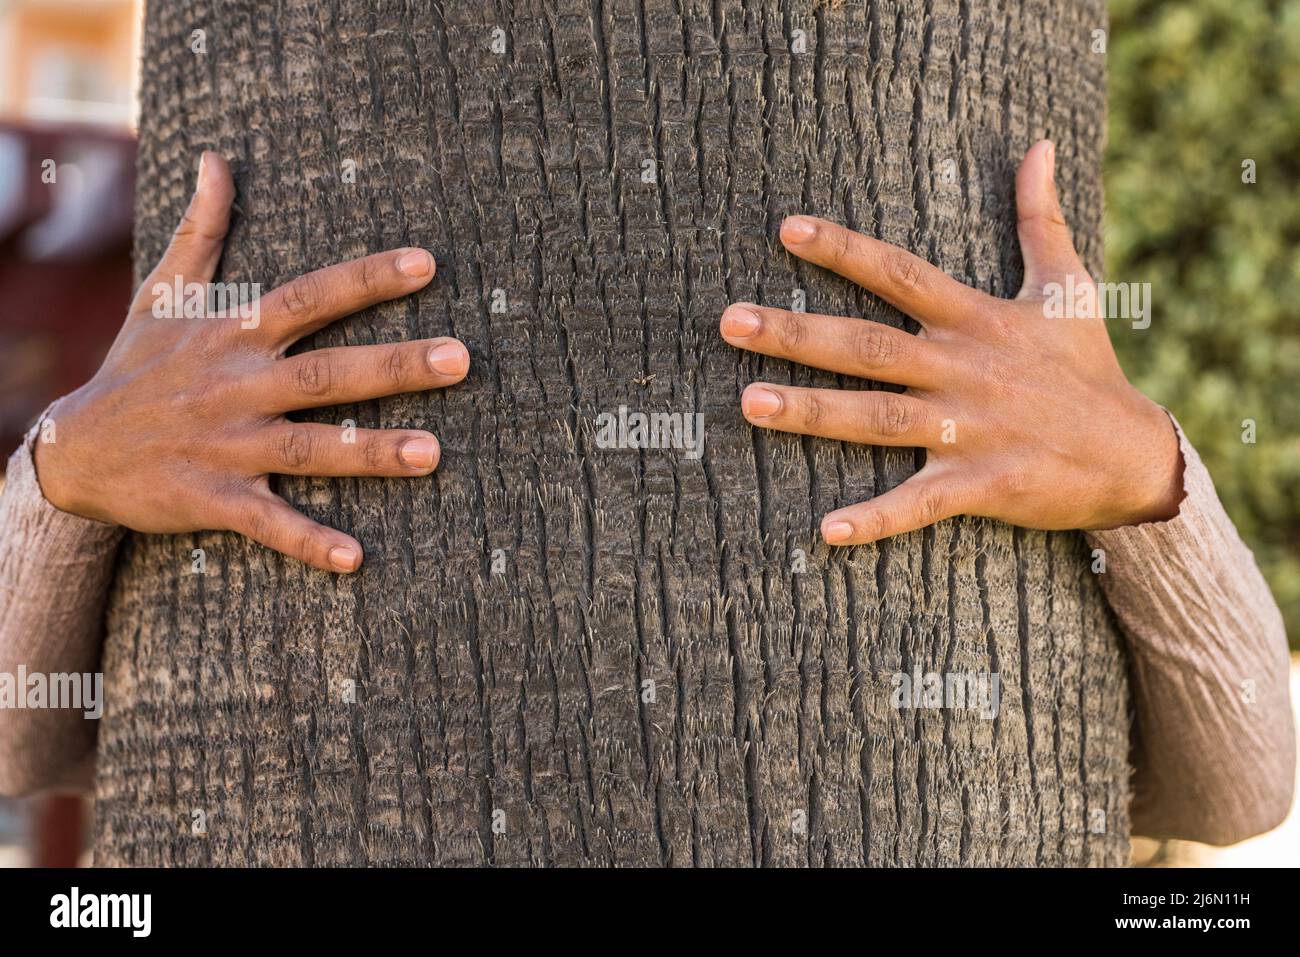 Hands hugging and protecting palm tree - nature environment safe protection concept - trunk trees close up and human embracing. Stock Photo